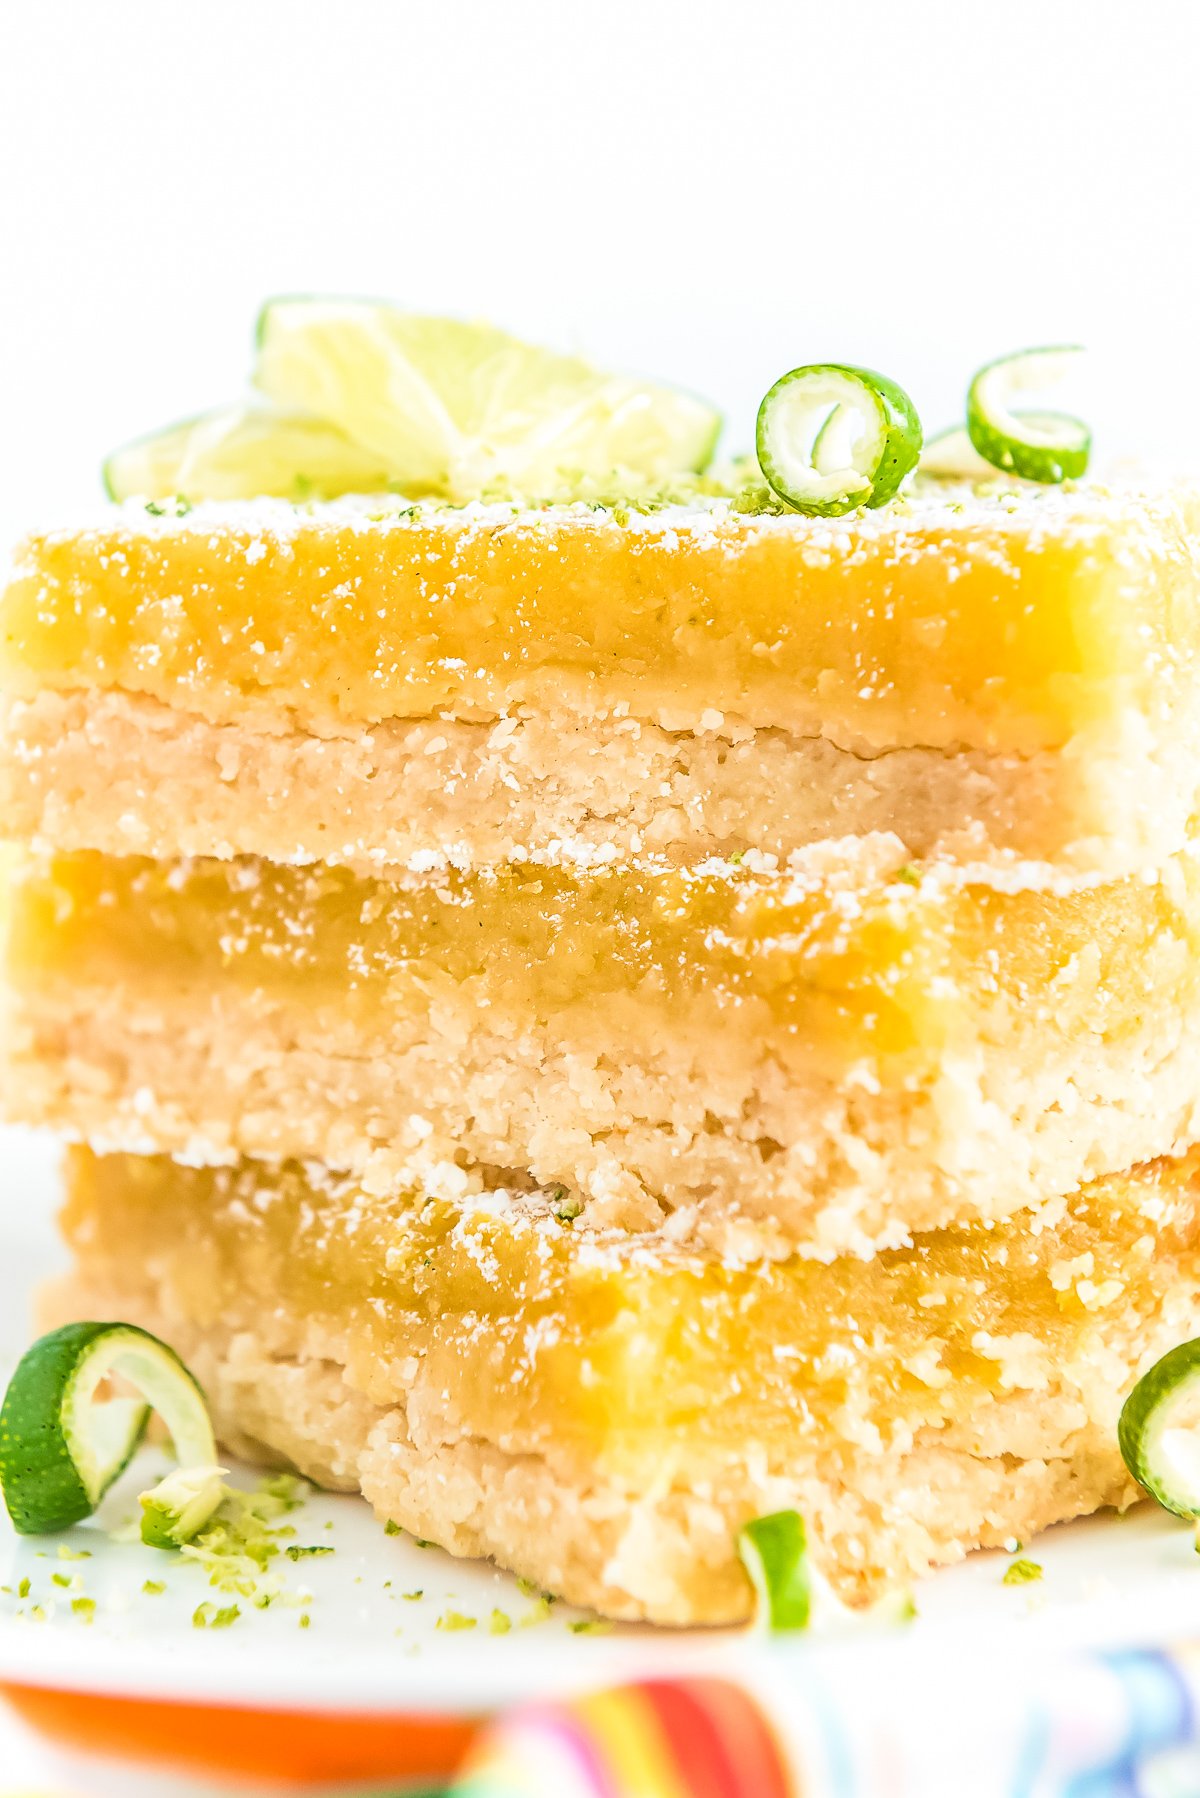 Three Lime bars stacked on top of each other.